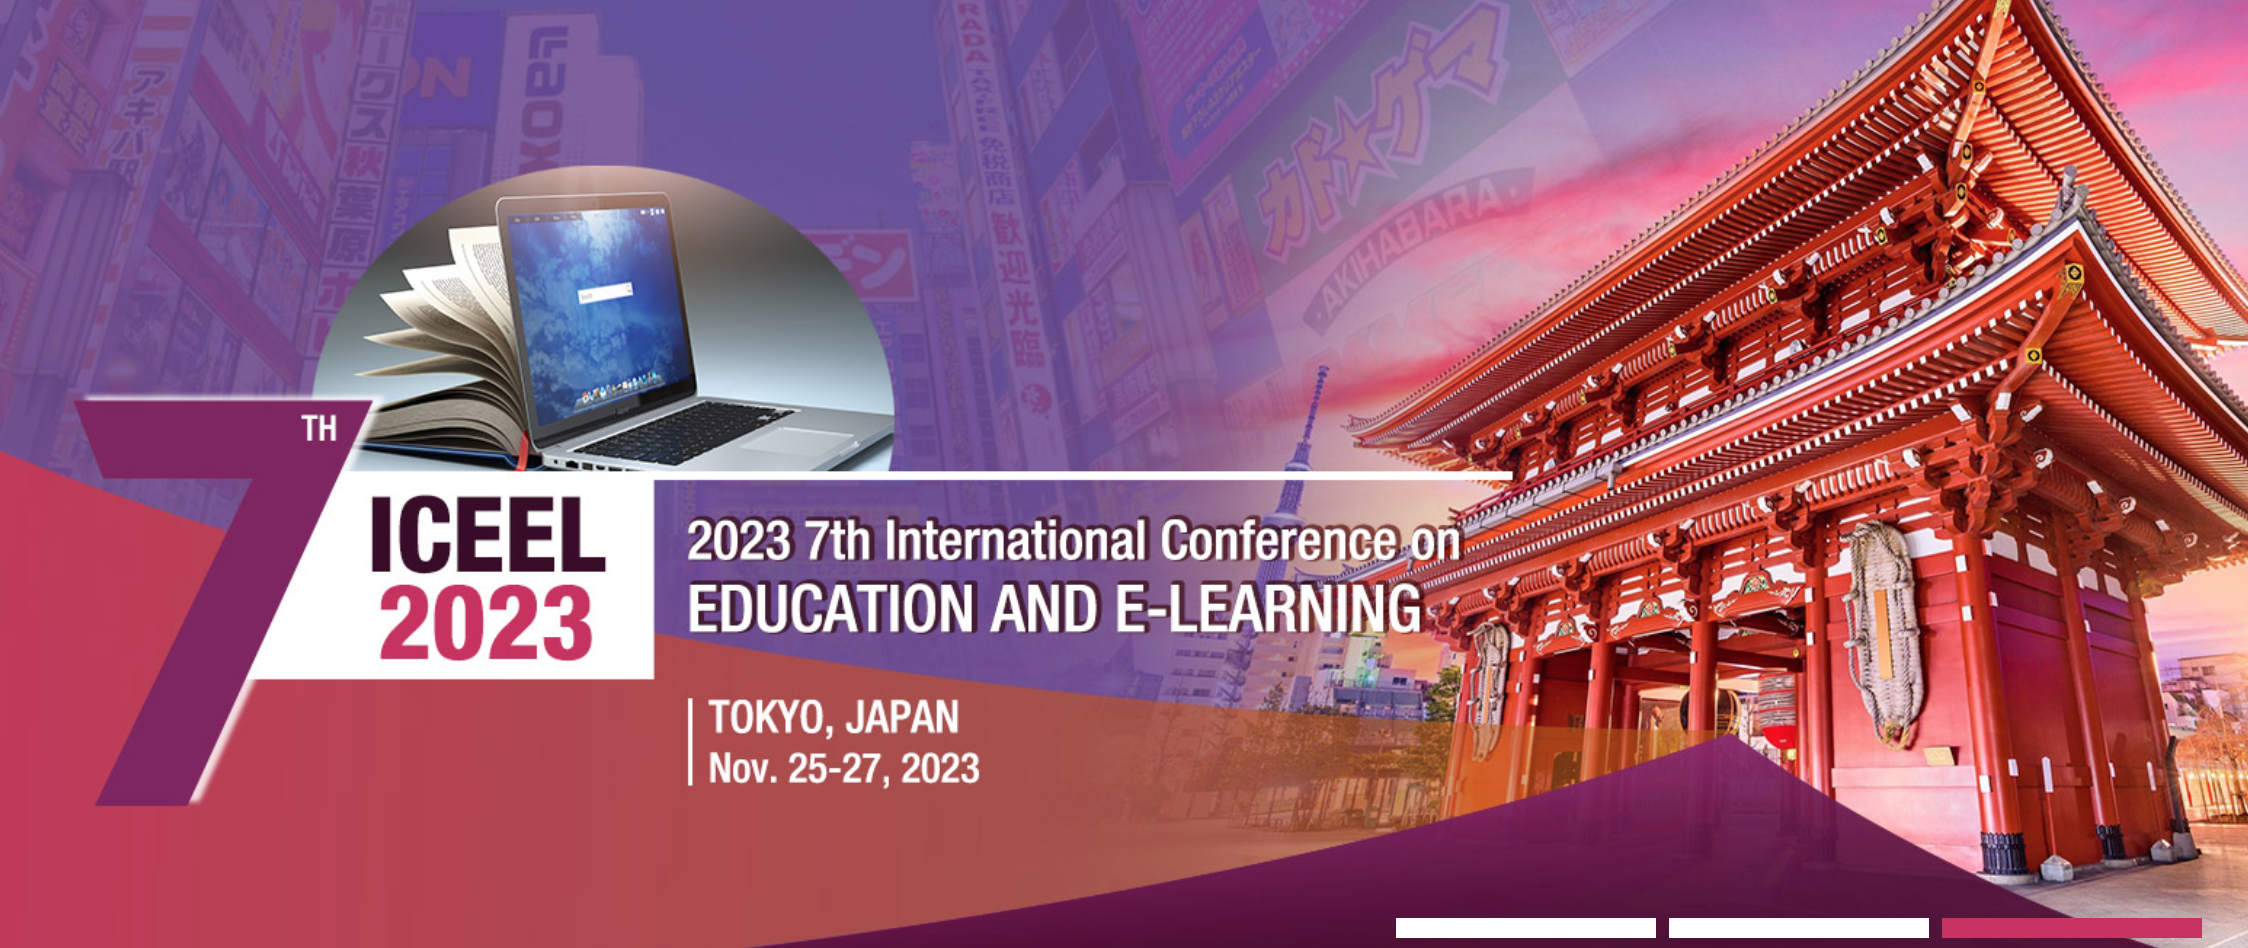 7th International Conference on Education and E-Learning (ICEEL)